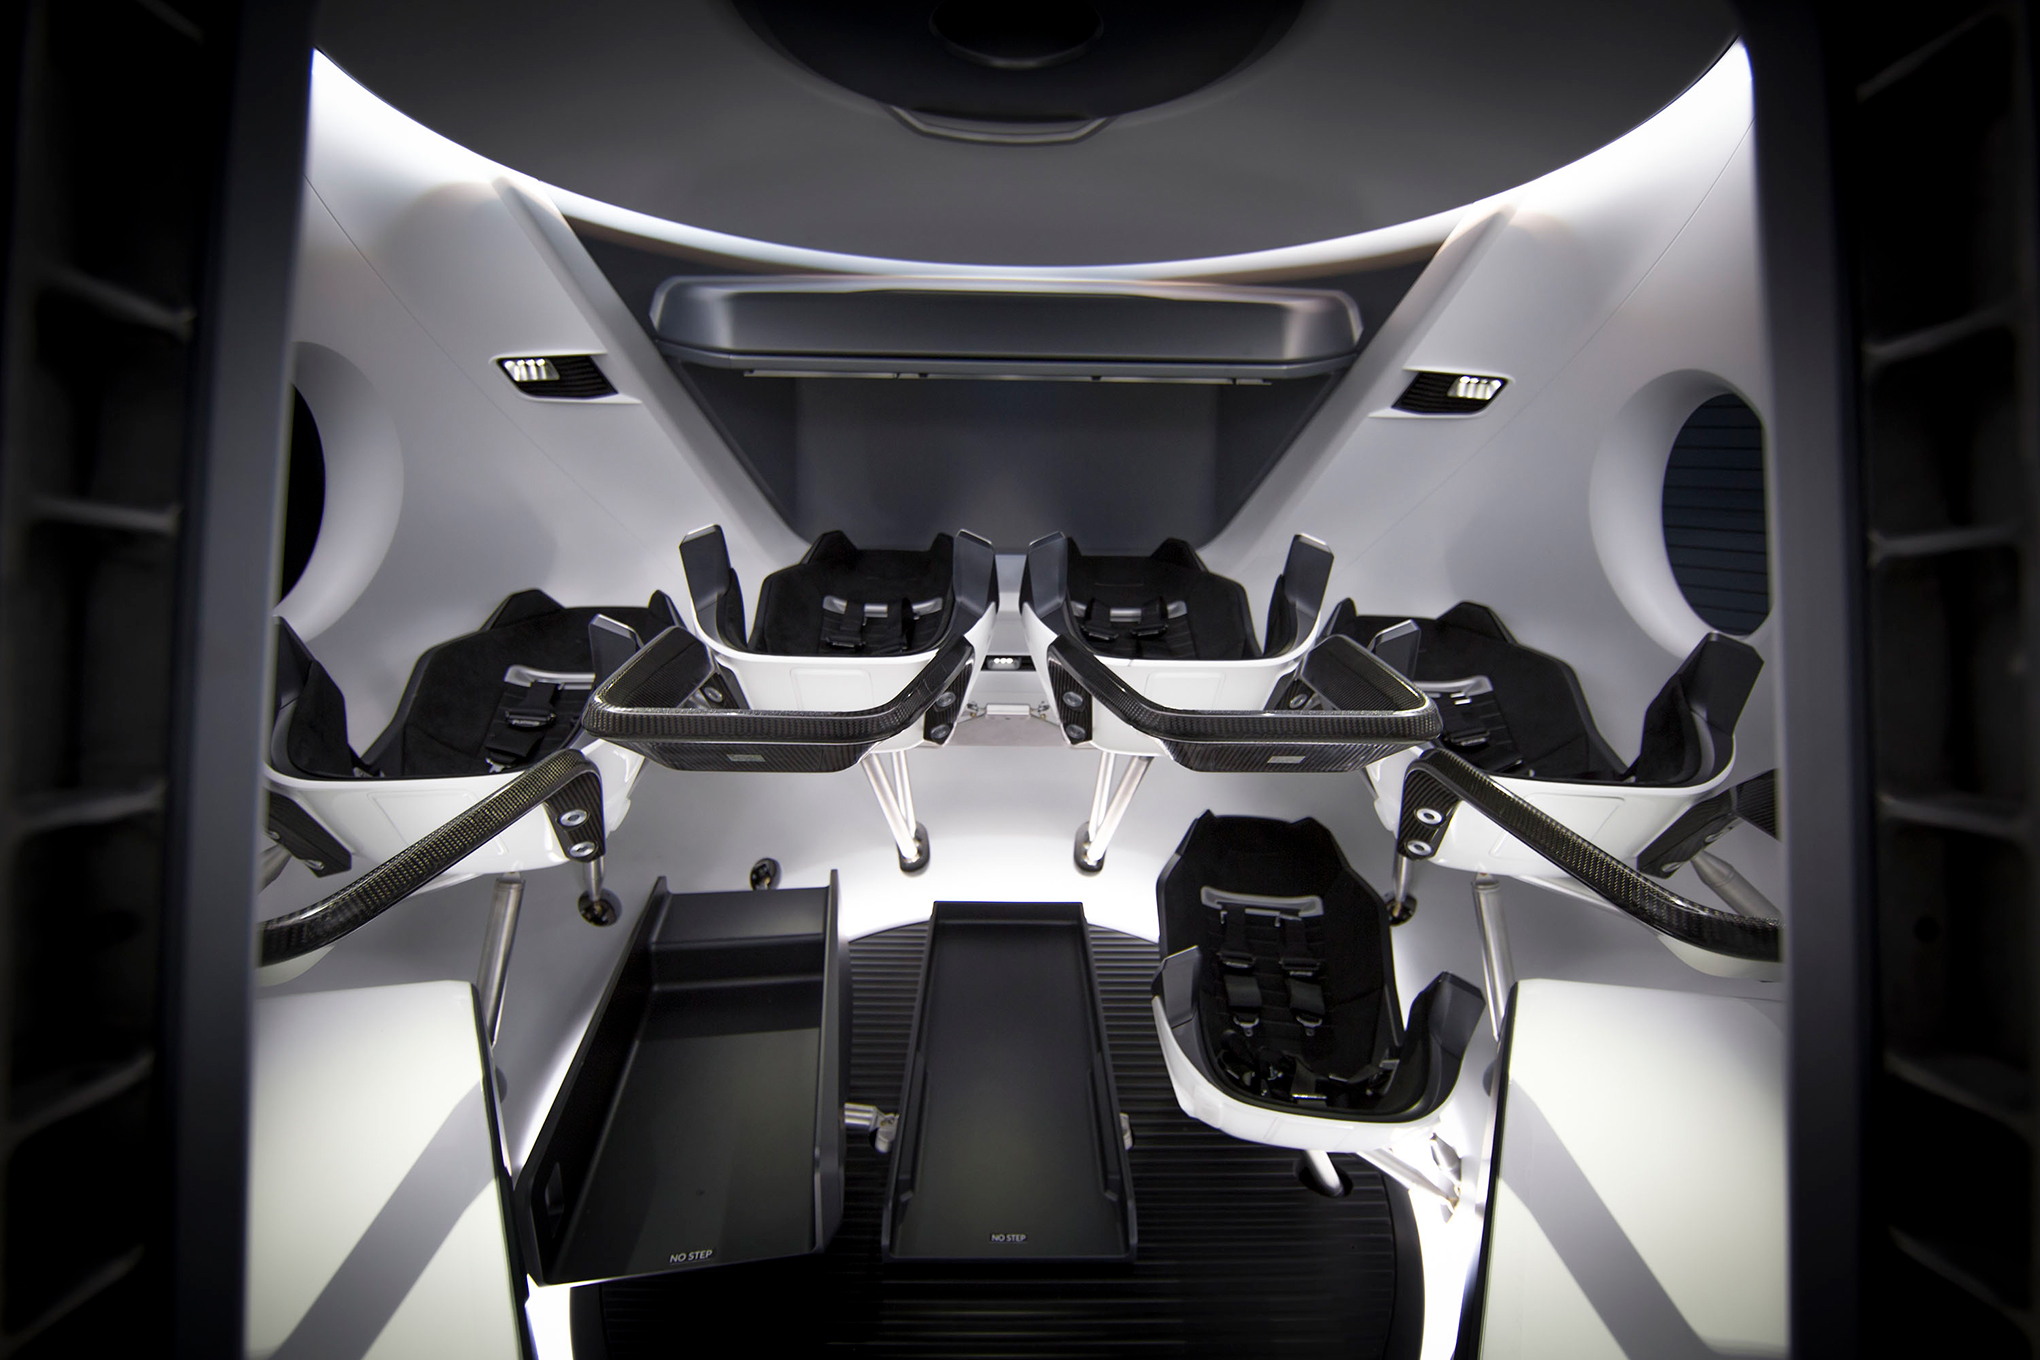 The seats in the Crew Dragon spacecraft are reconfigurable, allowing it to carry up to seven people—though four is typical for a NASA mission. Three large touchscreens replace the traditional instrument panel. (Courtesy SpaceX)